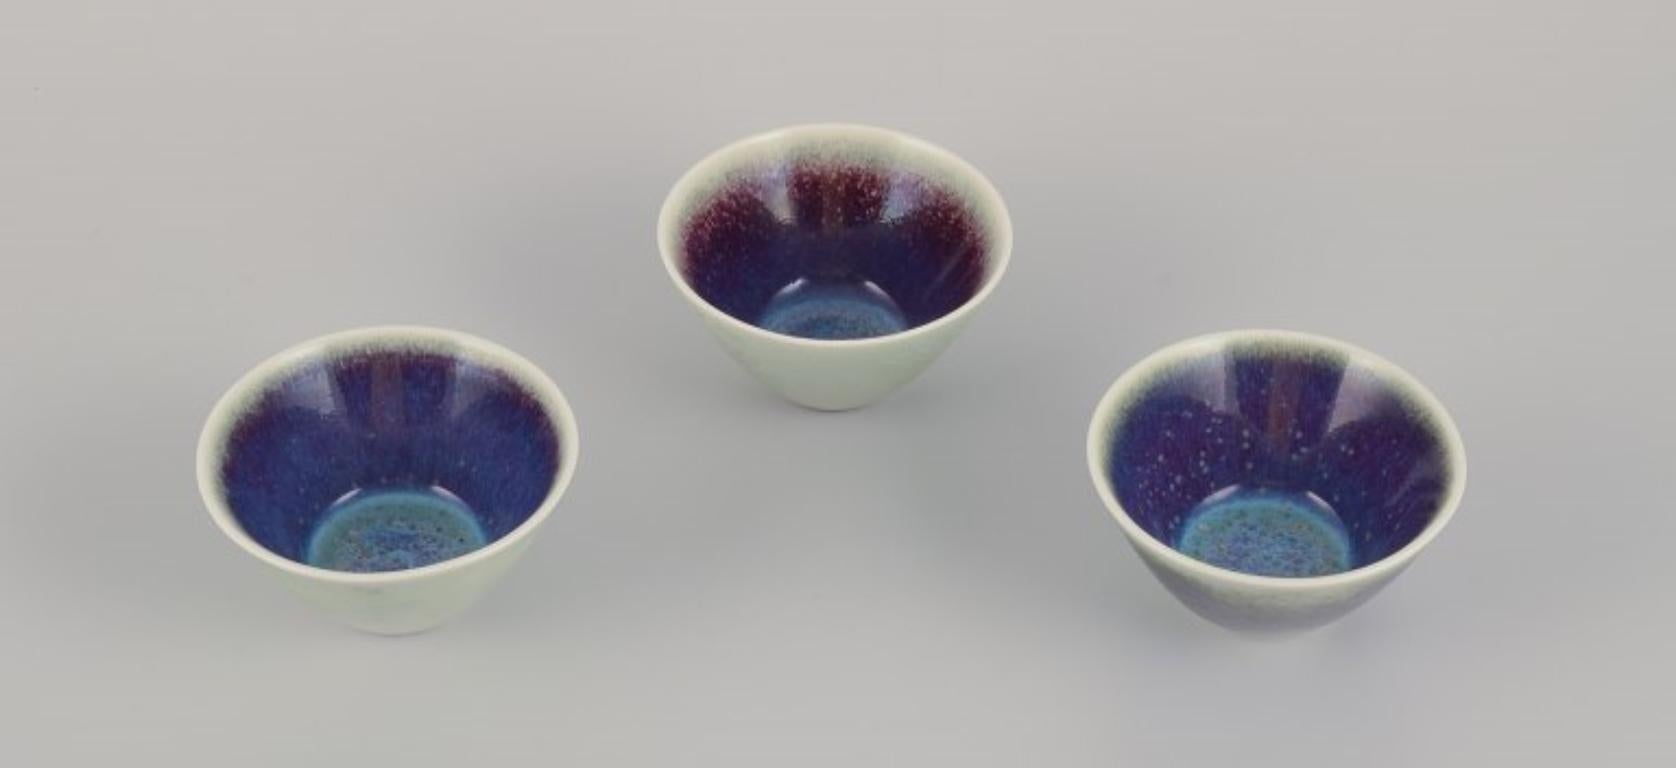 Three Rörstrand ceramic bowls with glaze in violet and green shades.
Mid-20th century.
Marked.
In excellent condition with natural crackling.
First factory quality.
Dimensions: Diameter 8.6 cm x Height 4.5 cm.